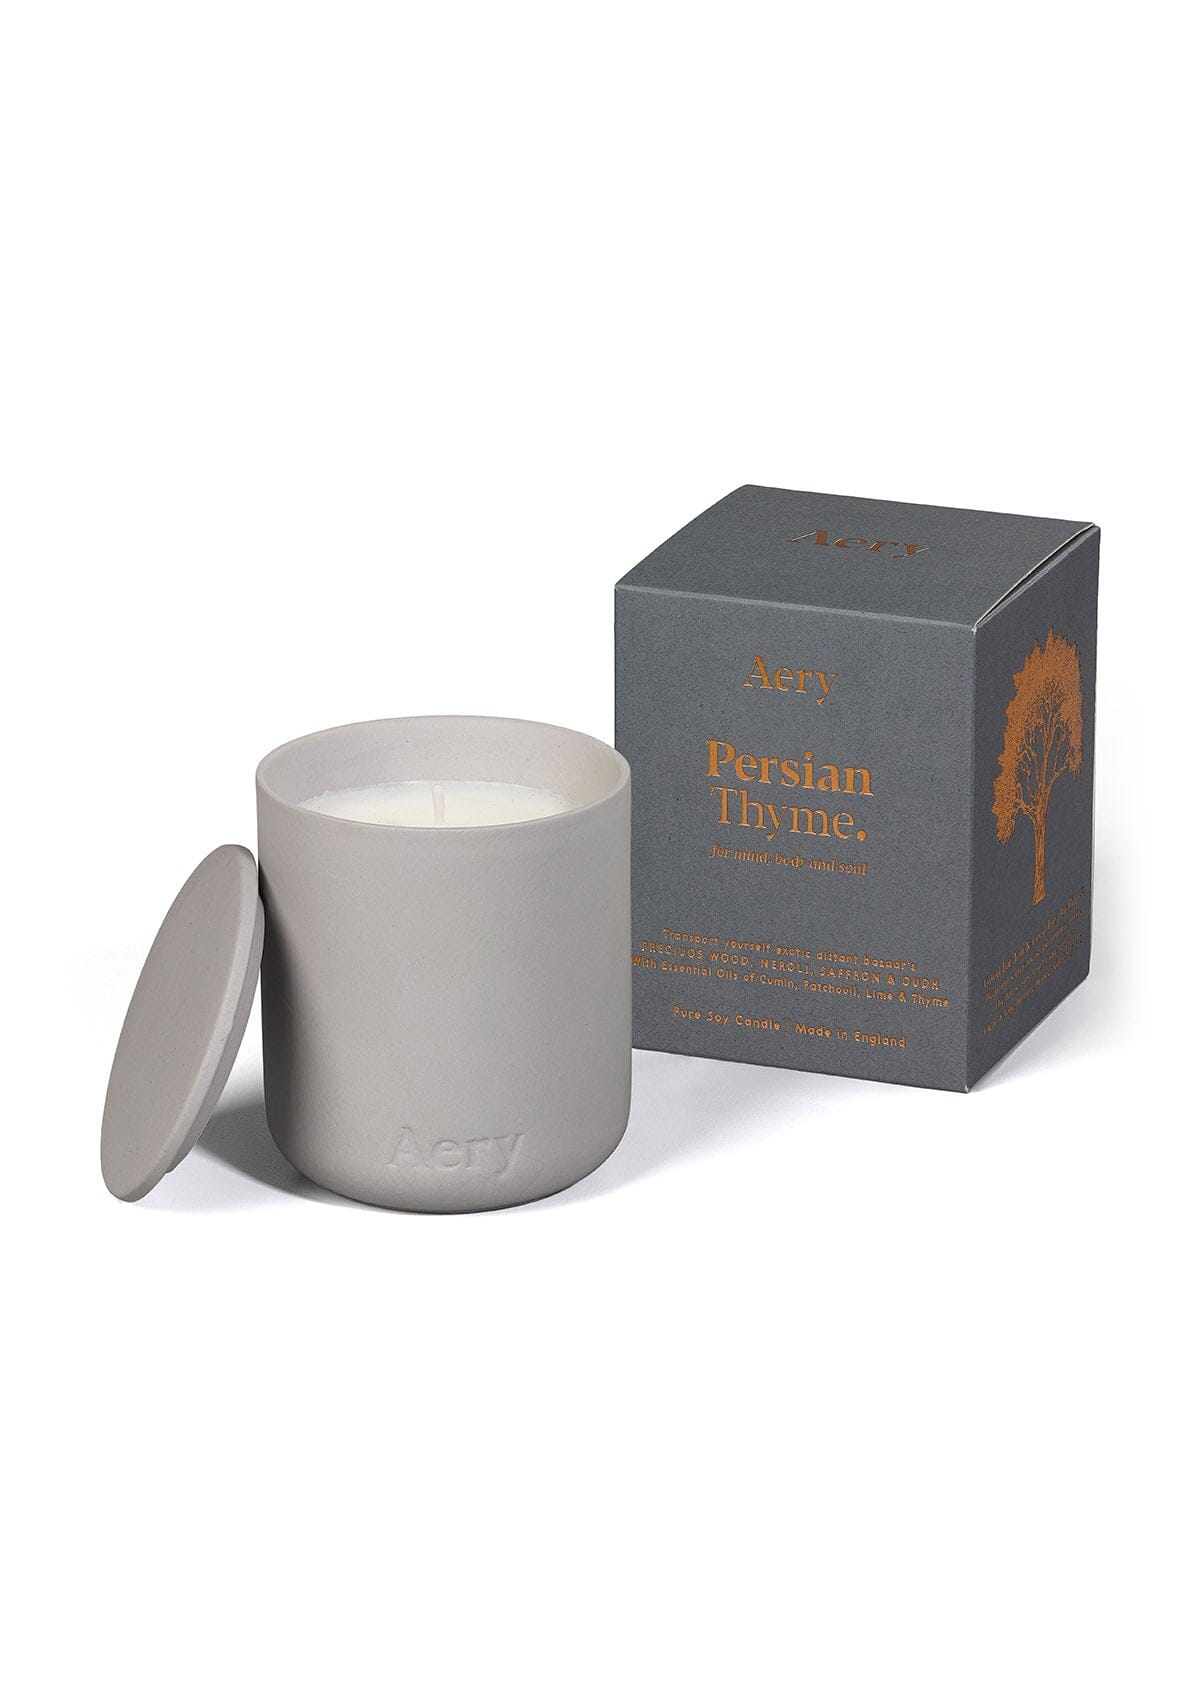 Grey ceramic Persian Thyme scented candle displayed next to product packaging by Aery on white background 